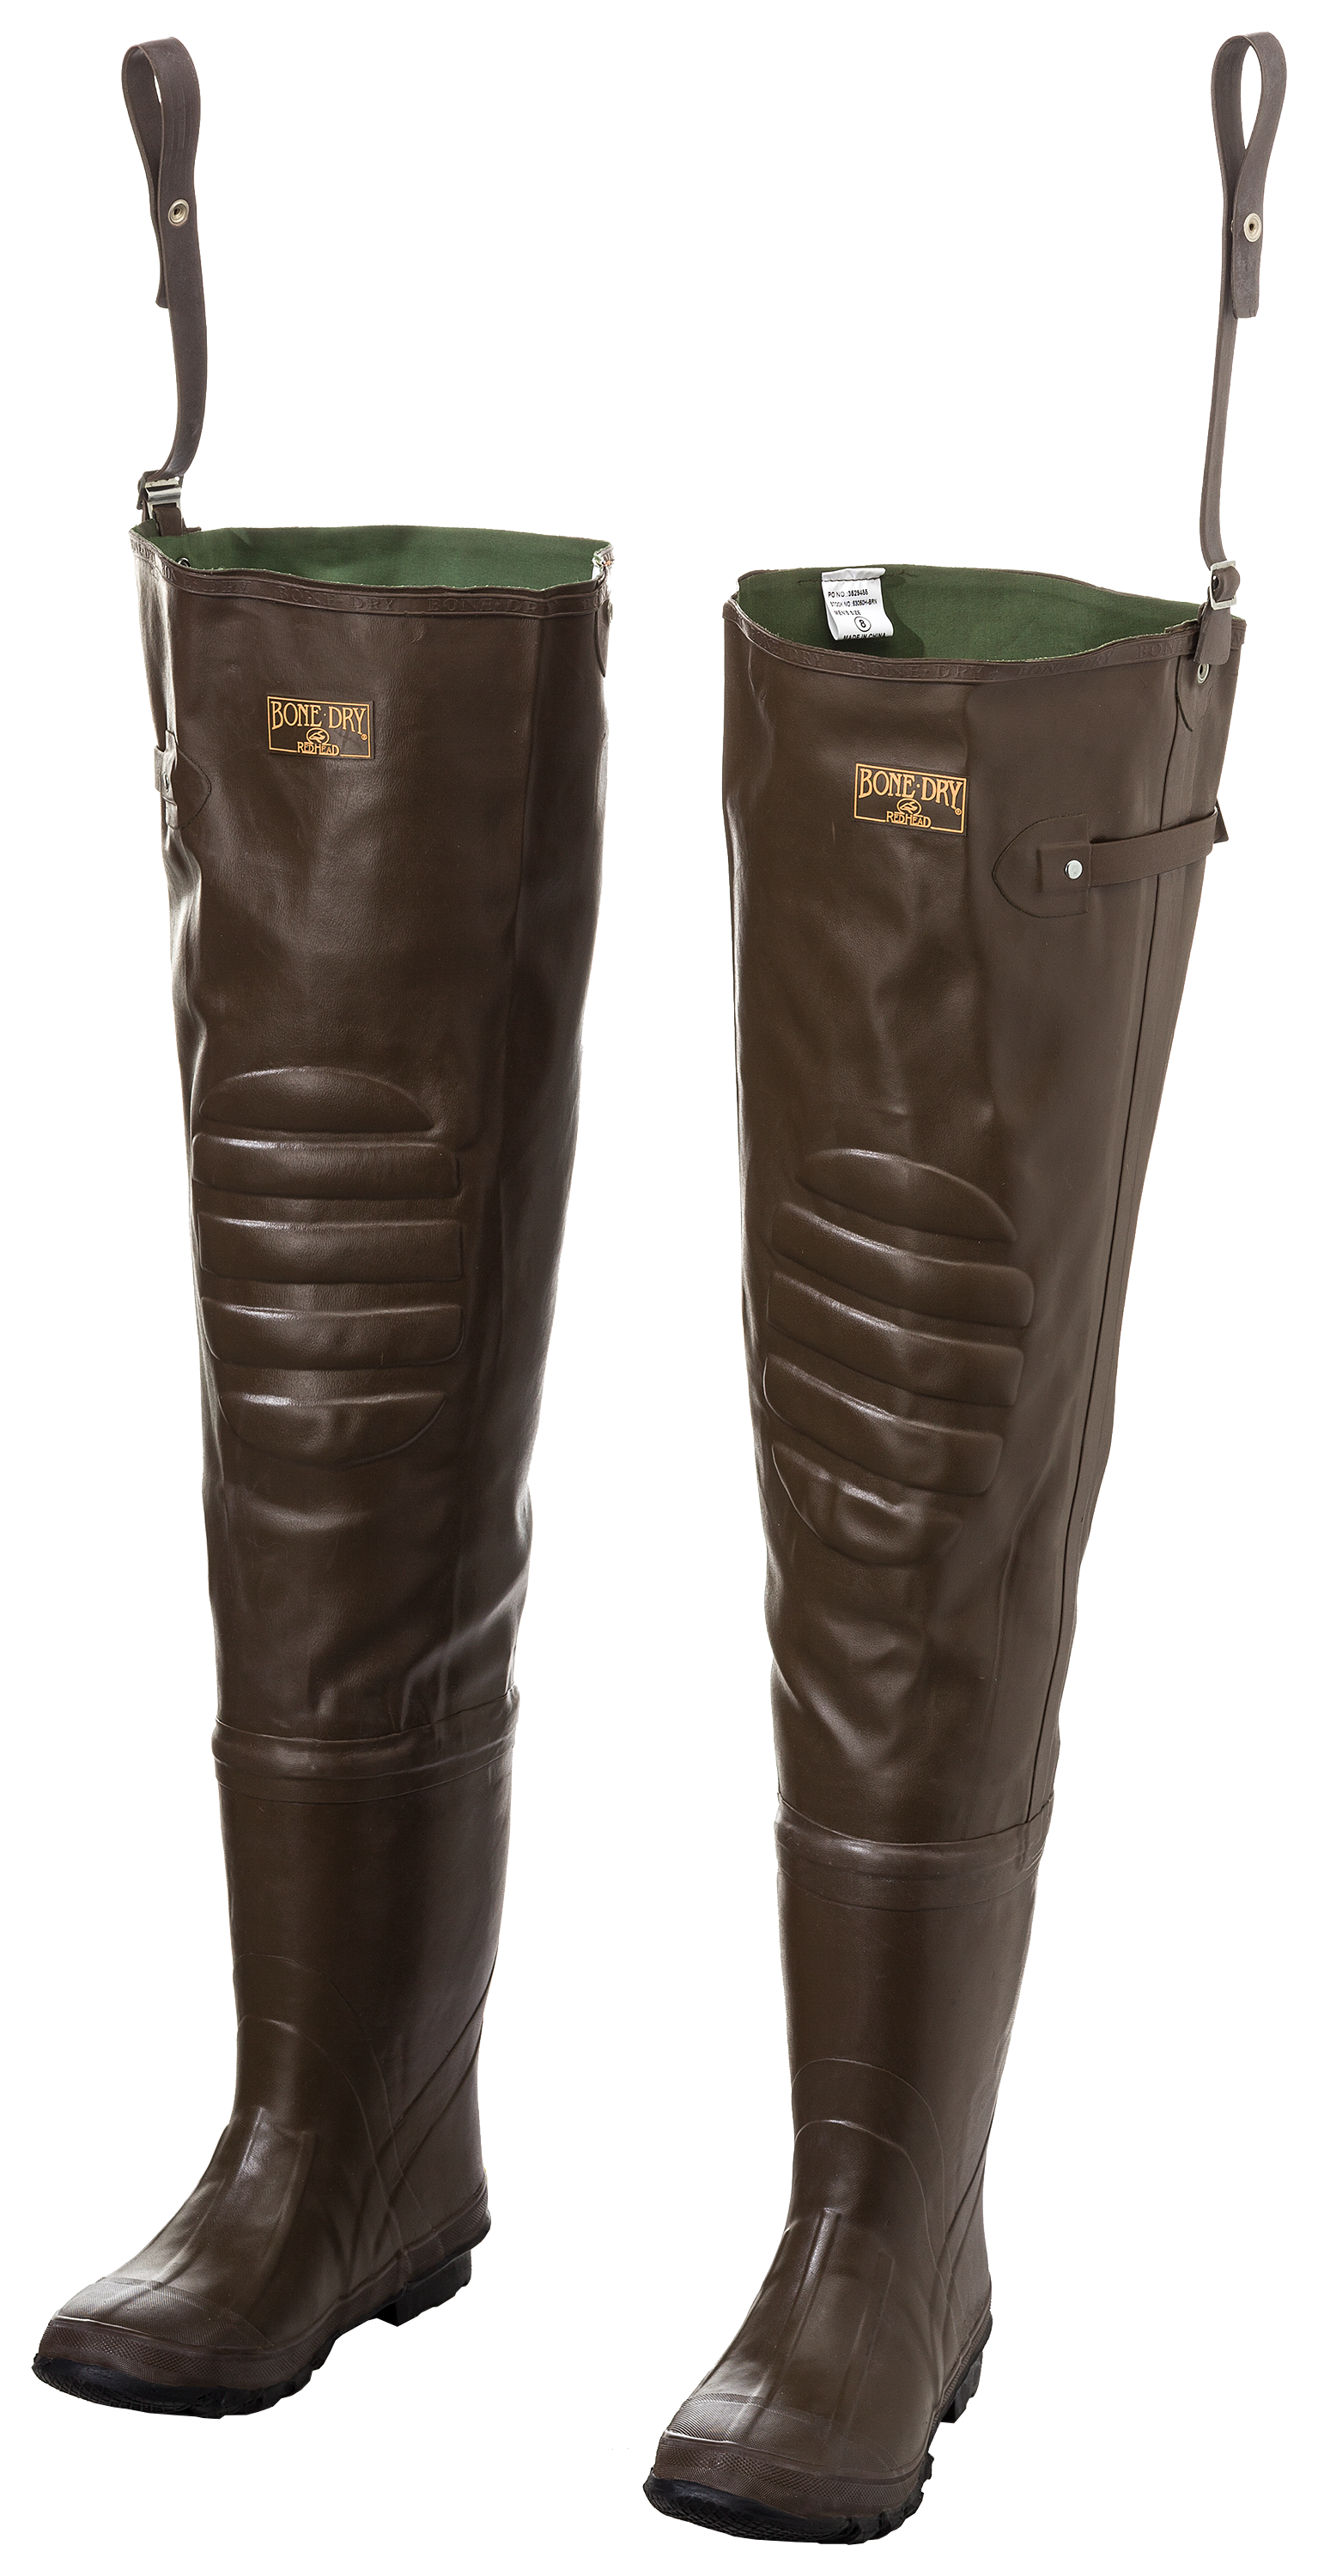 RedHead Bone-Dry Rubber Boot-Foot Hip Waders for Men, Ladies and